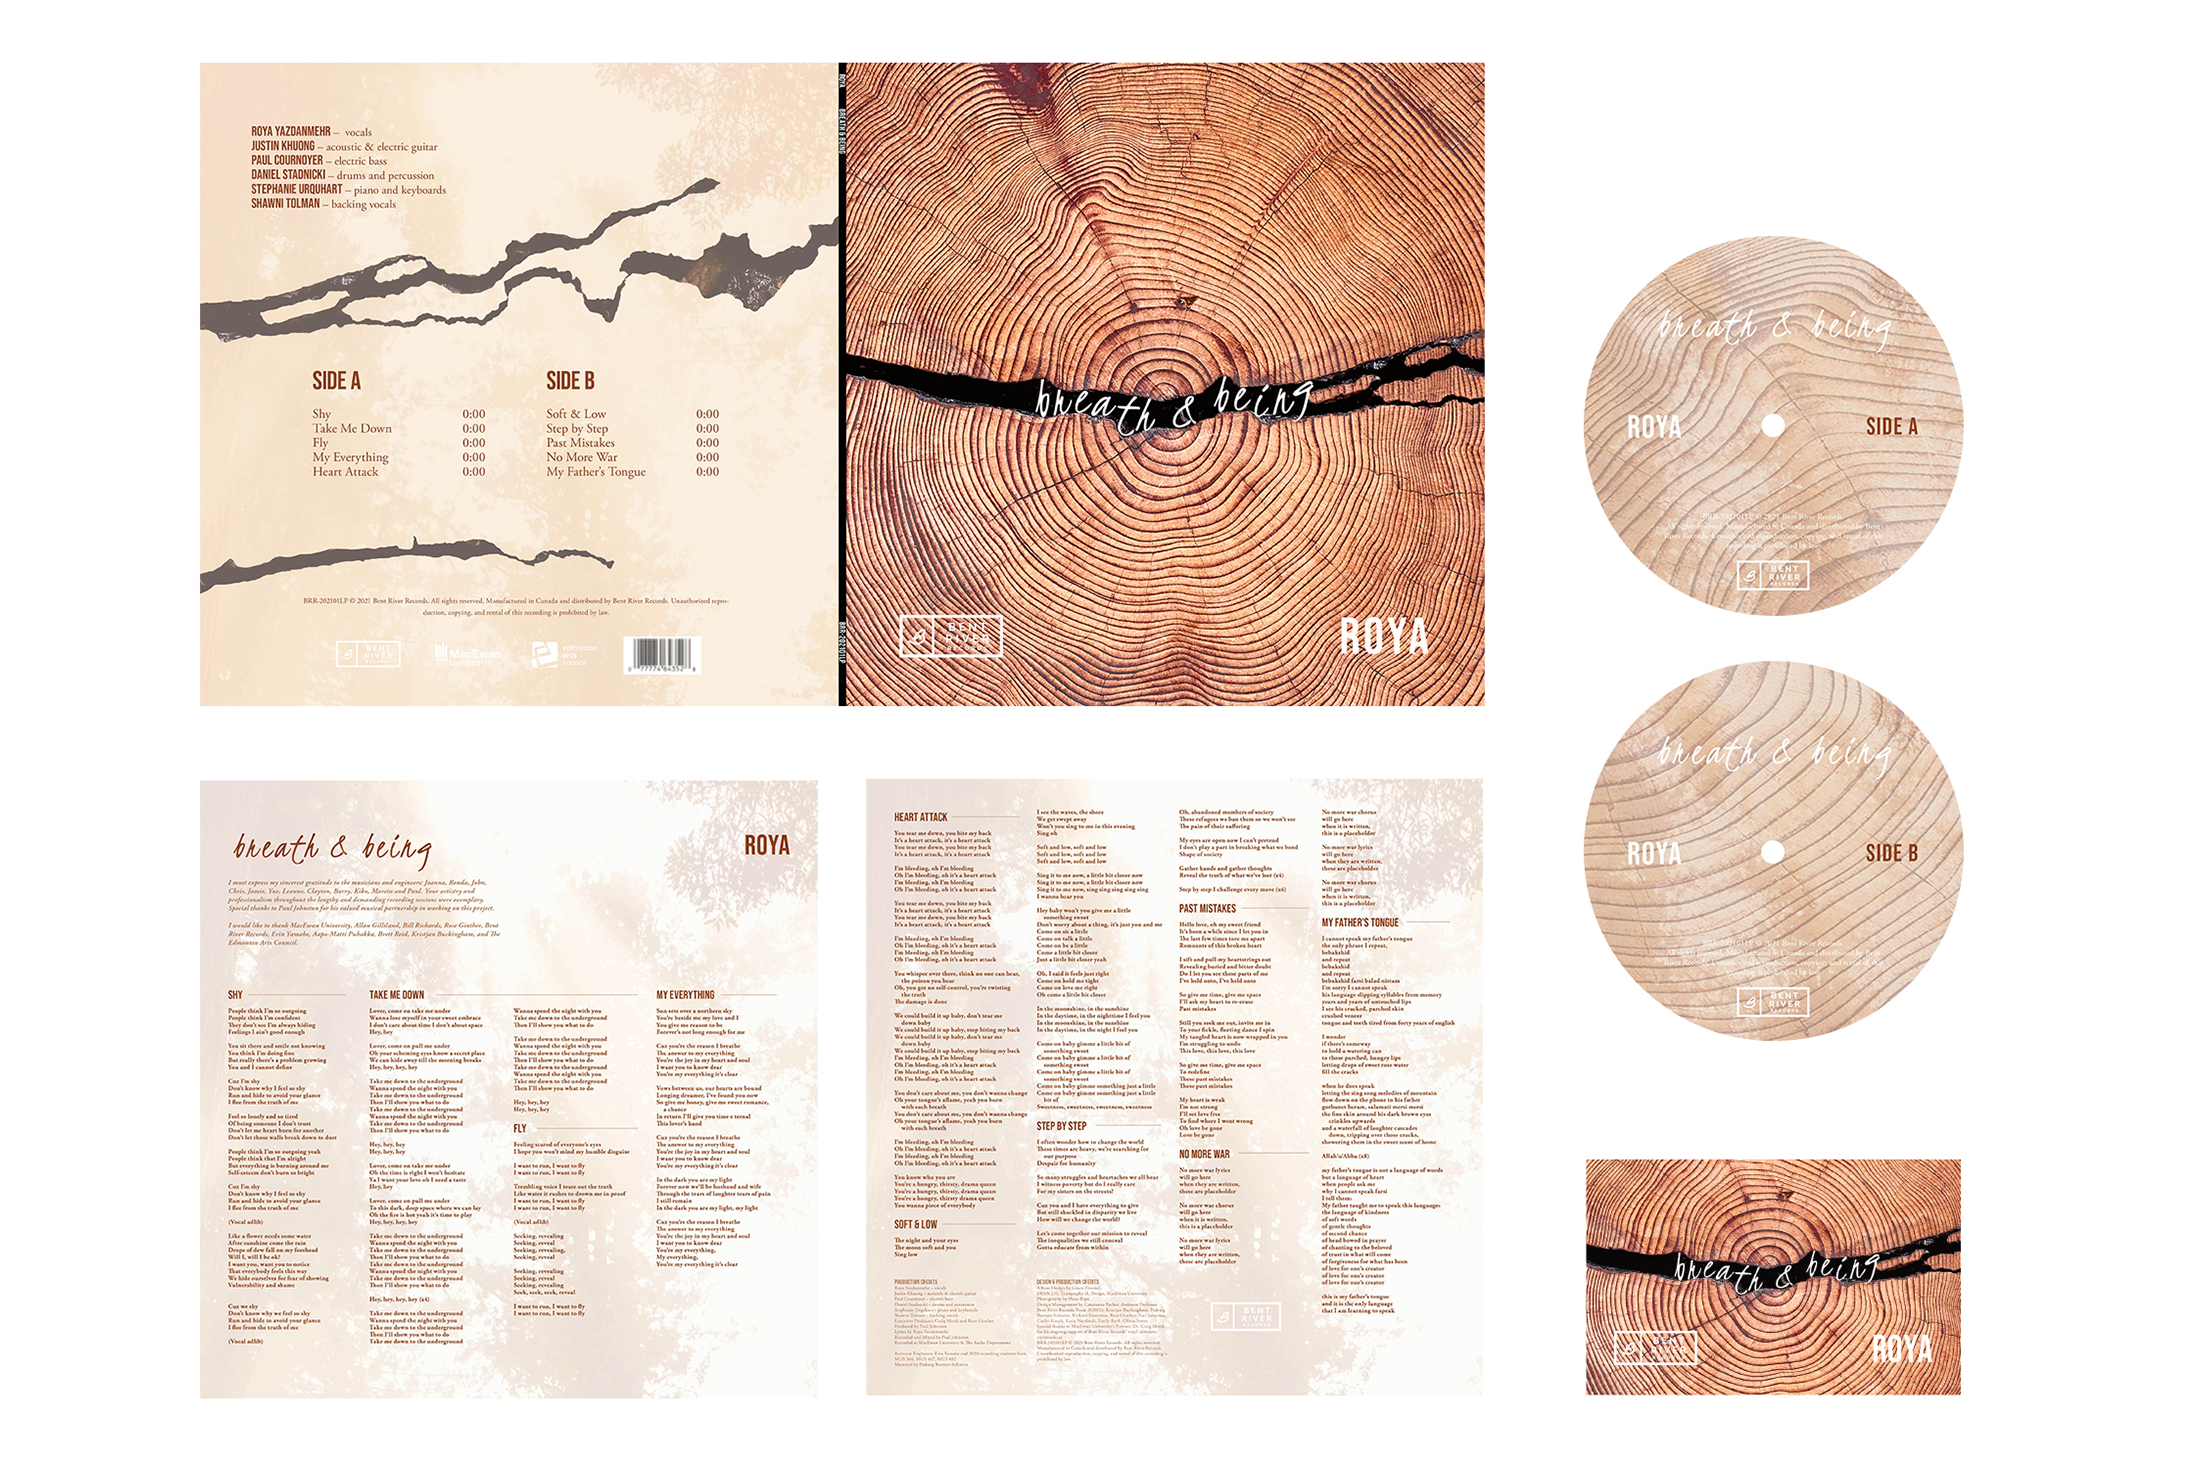 Breath & Being: Record Packaging - Image 2